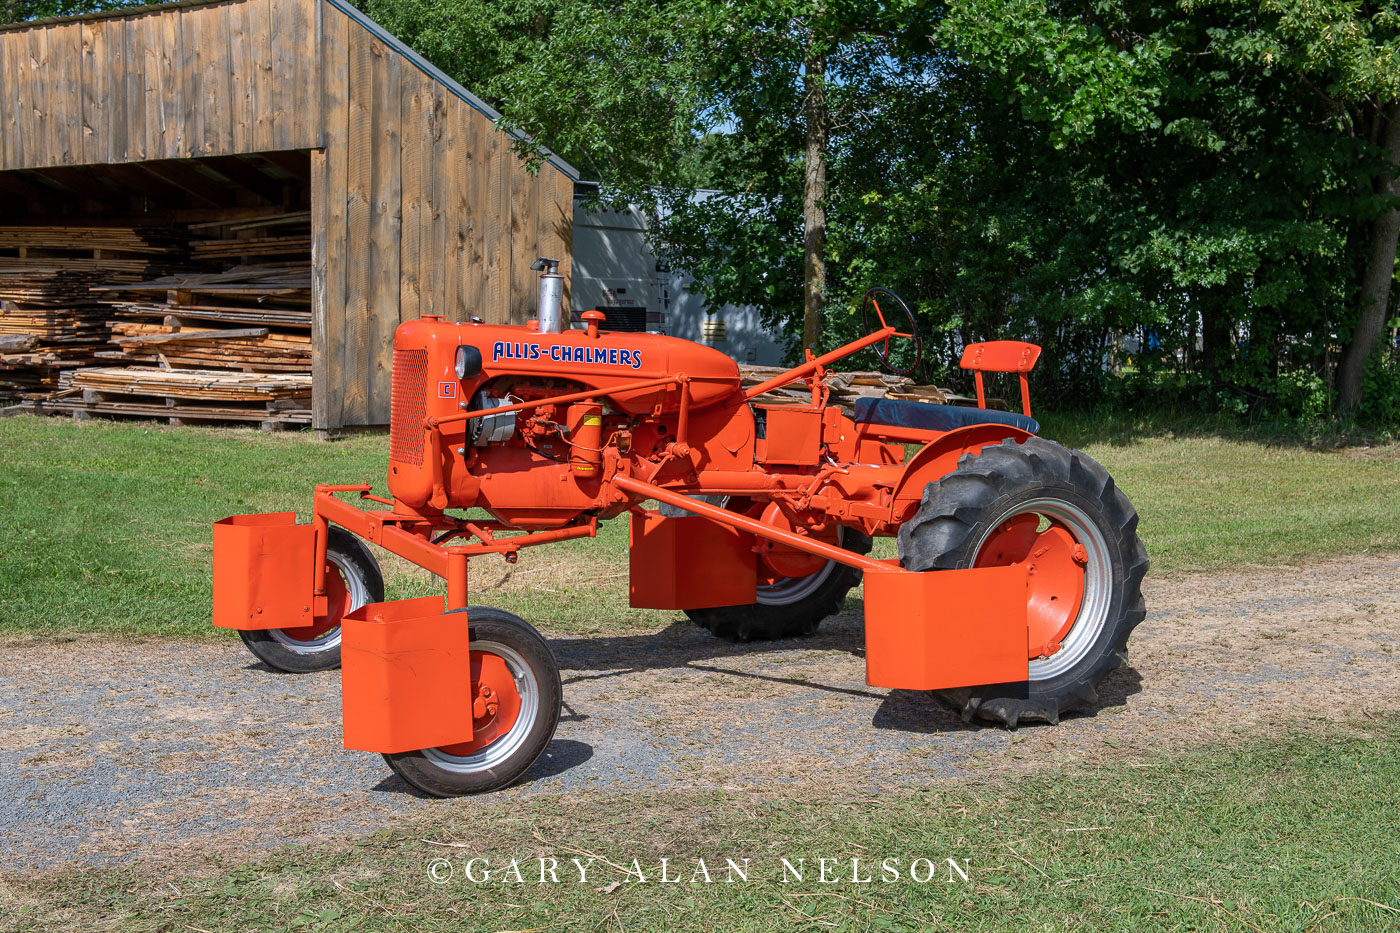 1942 Allis-Chalmers C with Ginsing set up